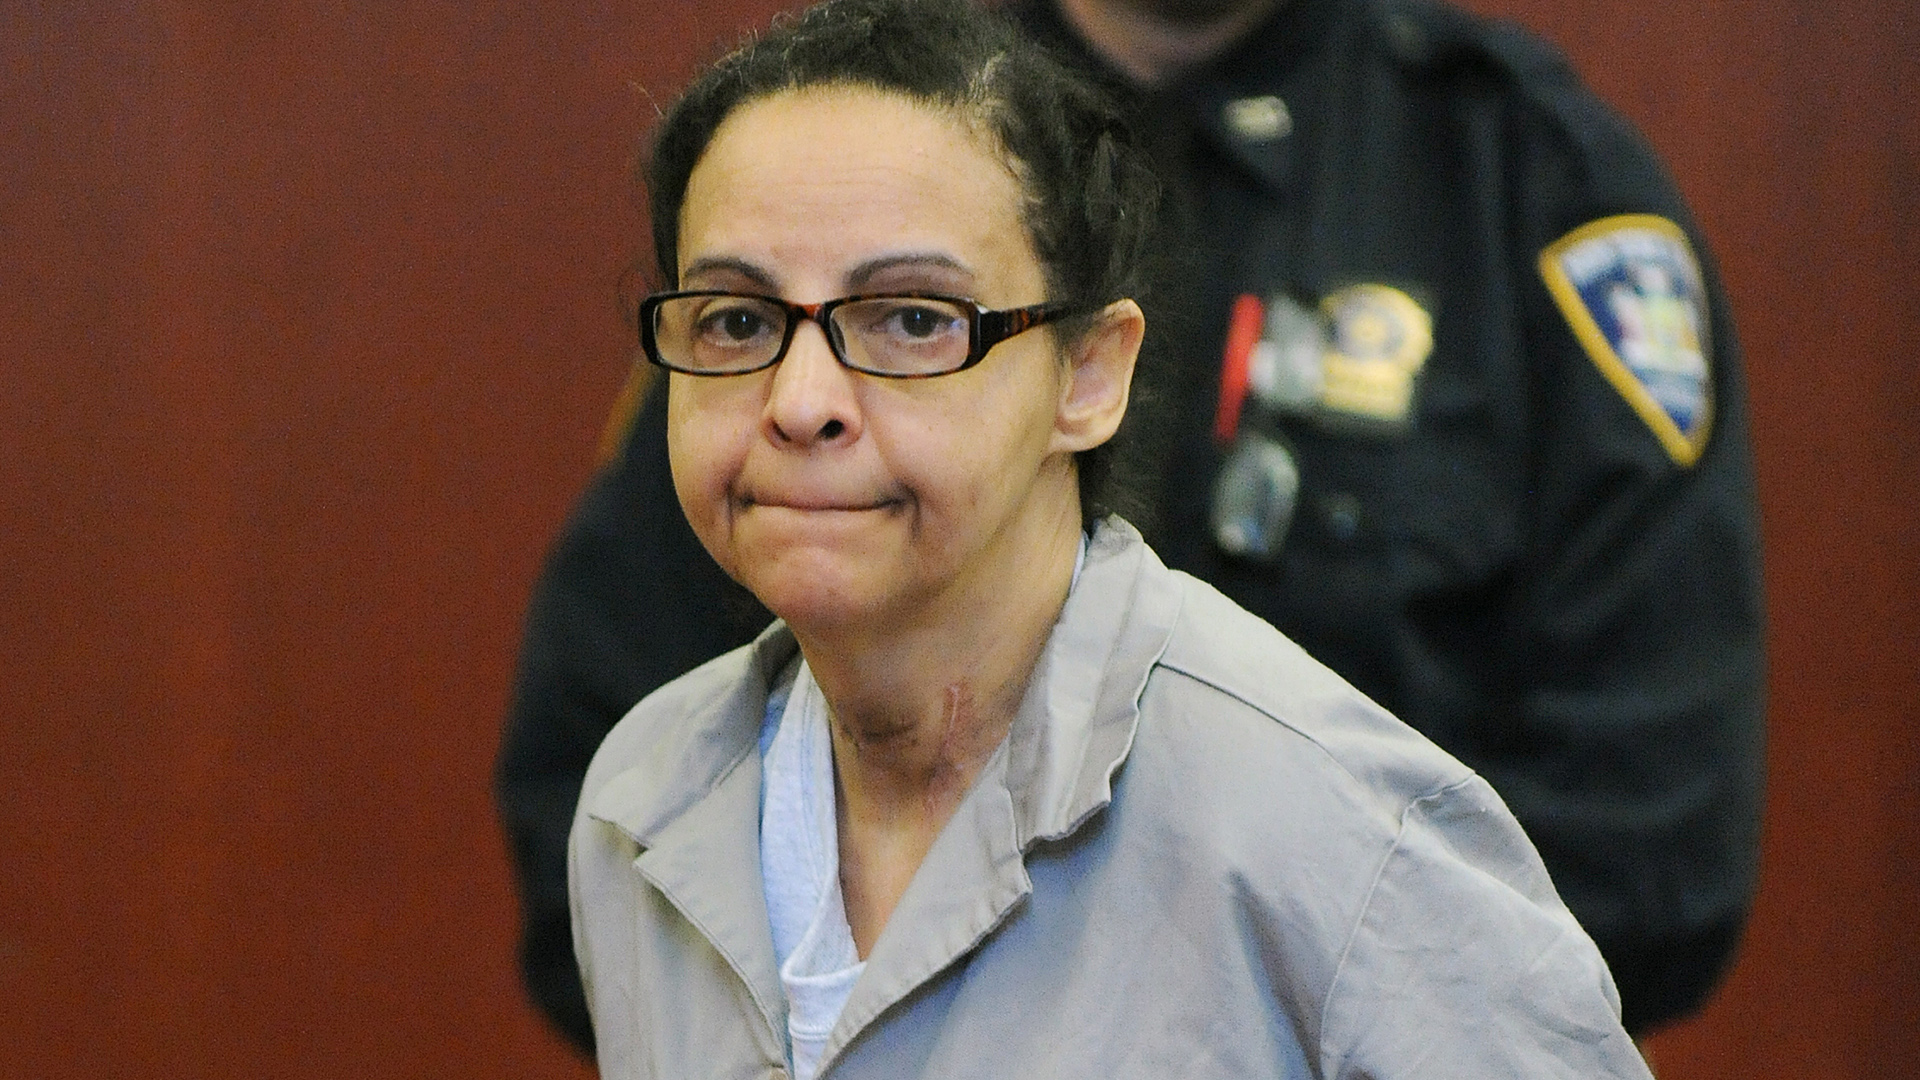 The 'Killer Nanny' Case: What Drives Some Babysitters to Murder